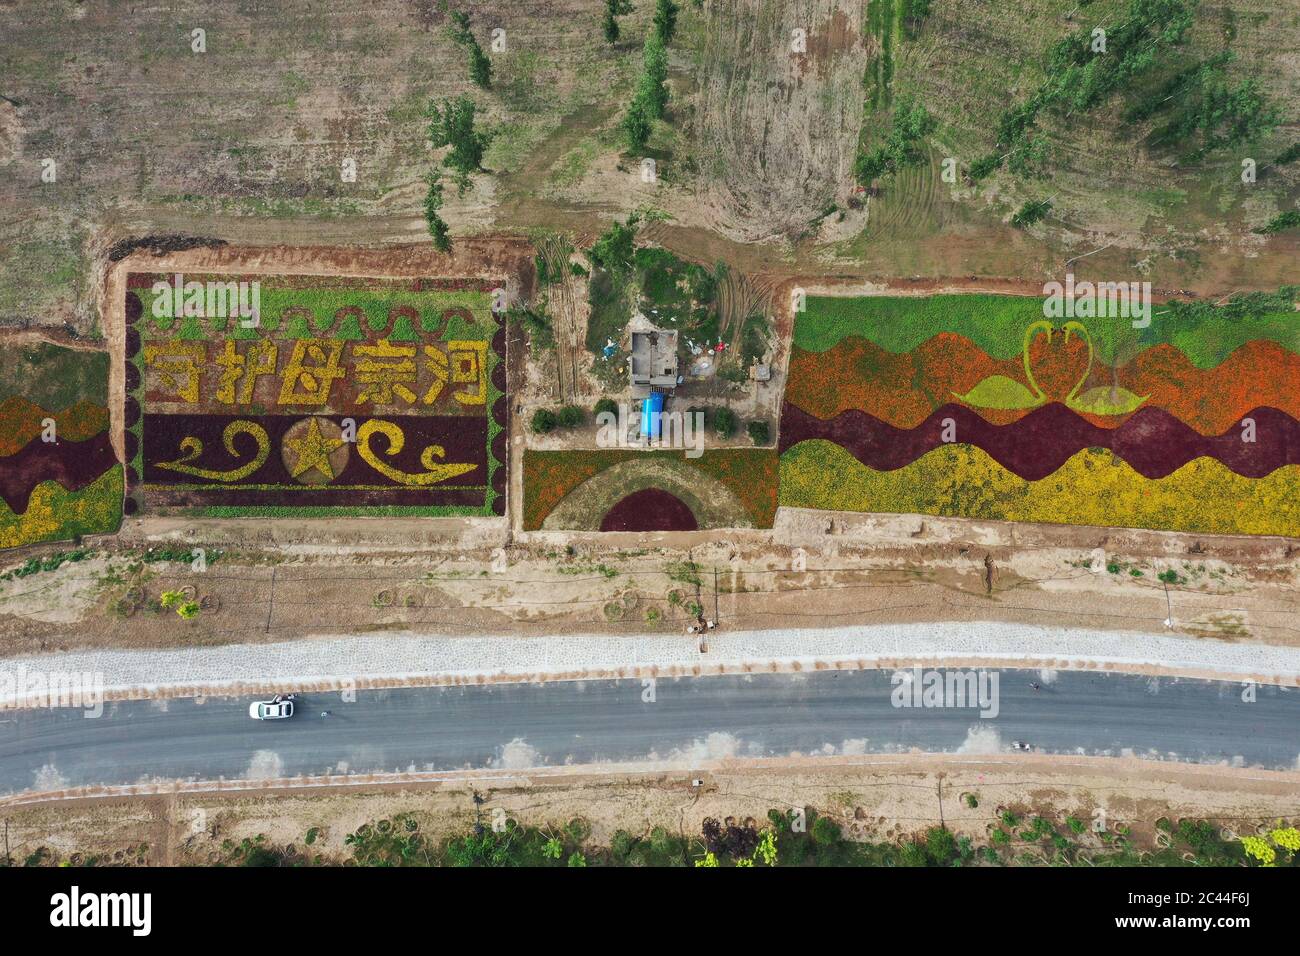 June 24, 2020, Sanxia, Sanxia, China: HenanÃ¯Â¼Å'CHINA-In The Sanmenxia section of the Yellow River in Sanmenxia city, Henan Province, on June 21, 2020, colorful flowers spell out the words ''to guard Mother River'' to express people's love and protection for the Yellow River and the ecological environment along the Yellow River. In recent years, the local government has comprehensively strengthened the protection of the ecological environment along the Yellow River, ensured the long-term stability of the Yellow River and ensured the high-quality development of the Yellow River economic belt, Stock Photo